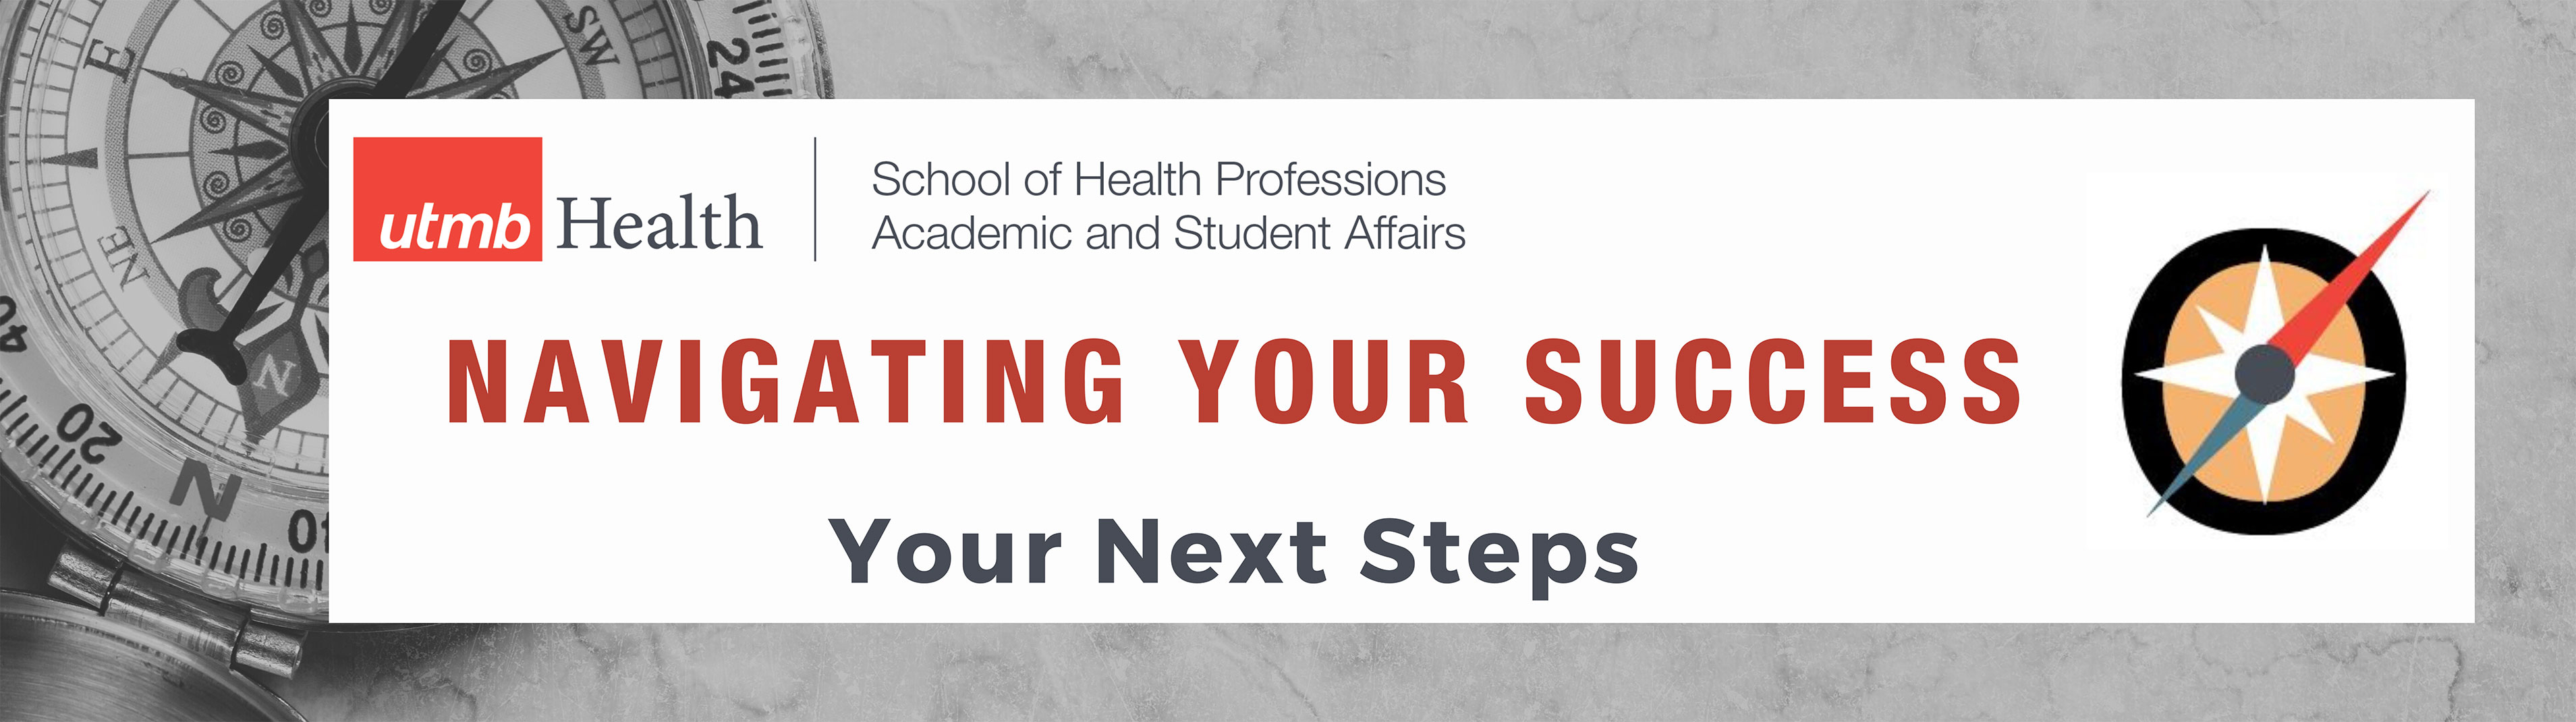 UTMB Health School of Health Professions Academic and Student Affairs Navigating Your Success Your Next Steps